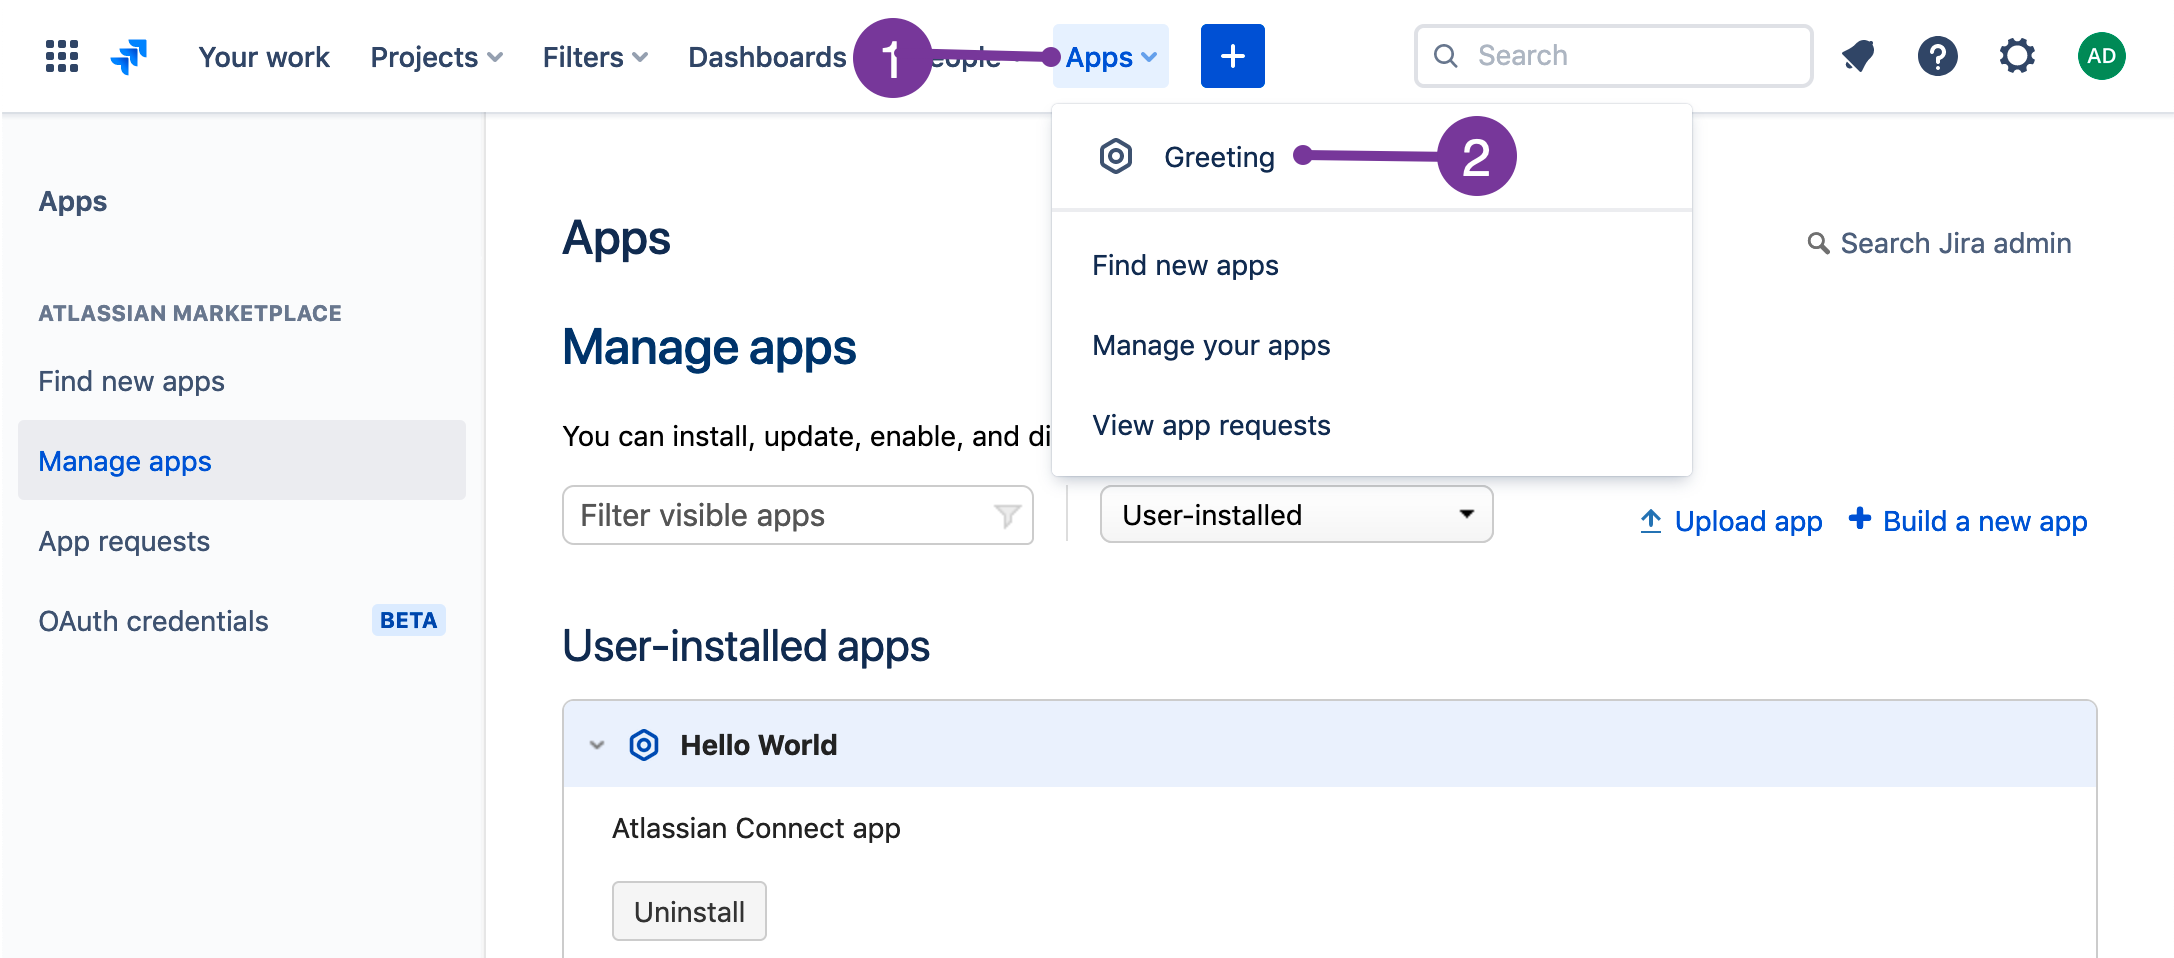 Opening the Hello World app from the Apps menu Greeting item